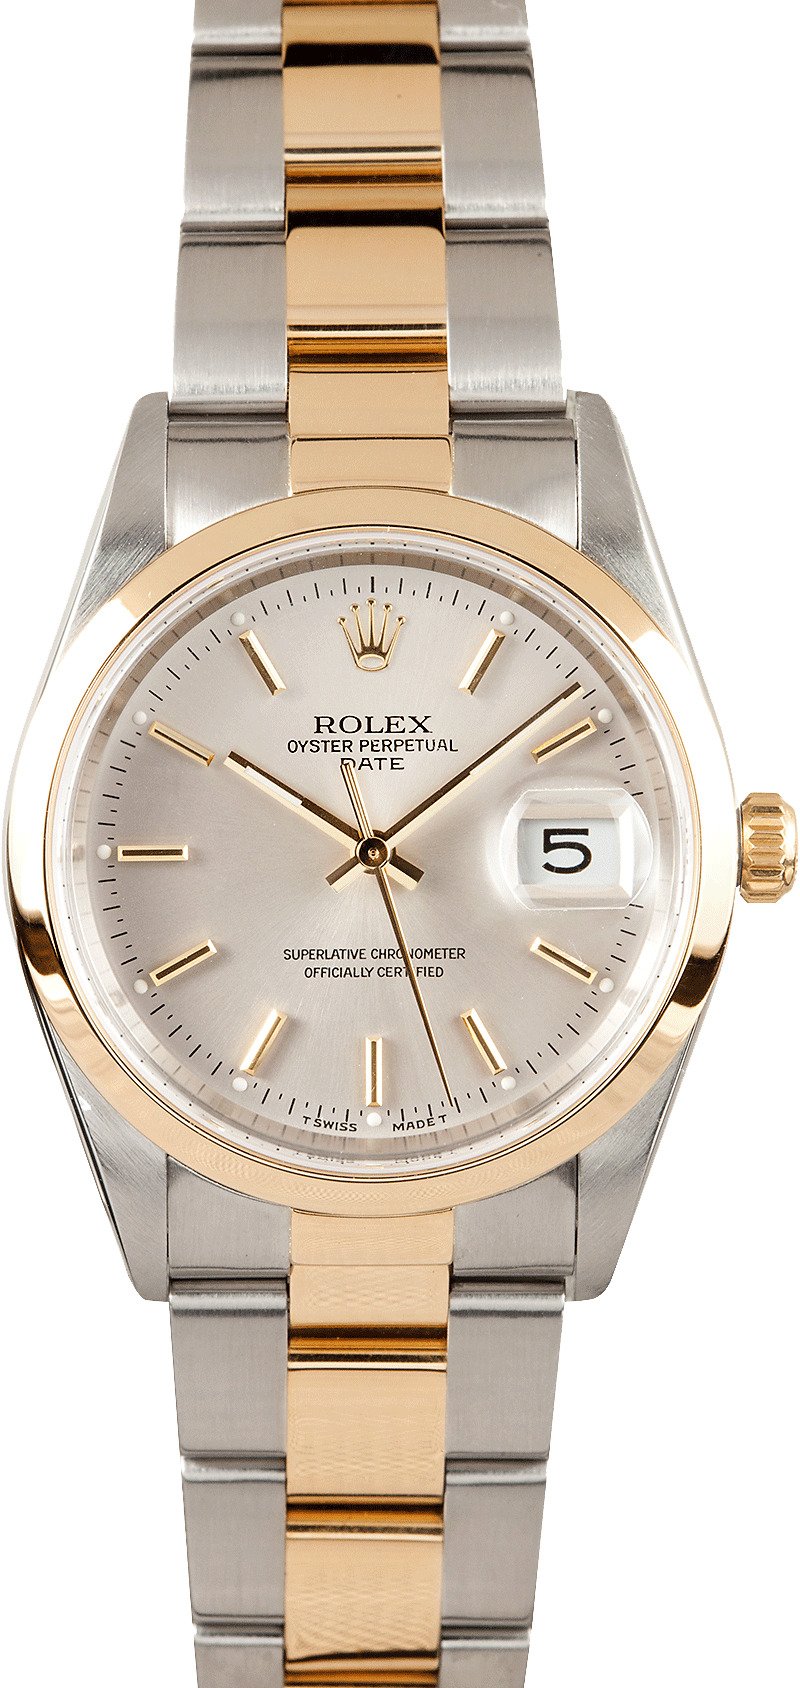 Rolex Oyster Perpetual Date - Save up 